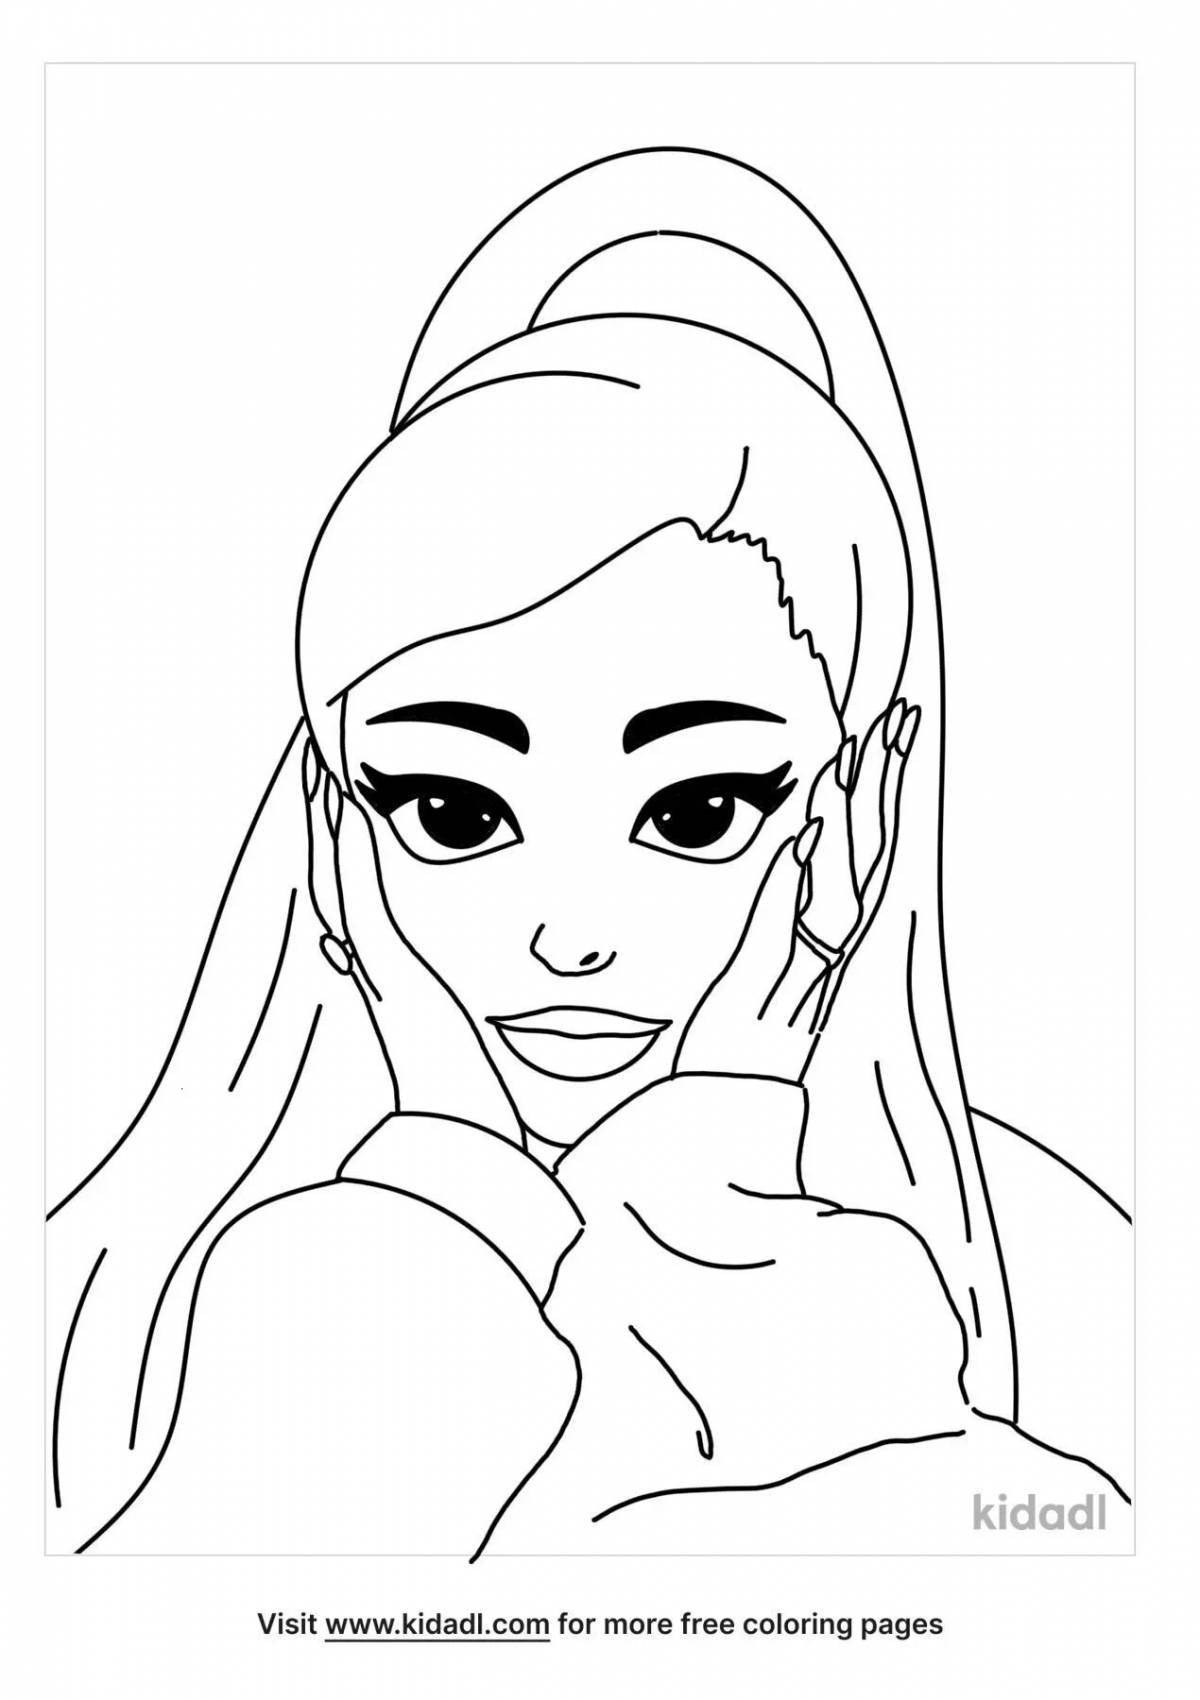 Ariana Grande's playful coloring page